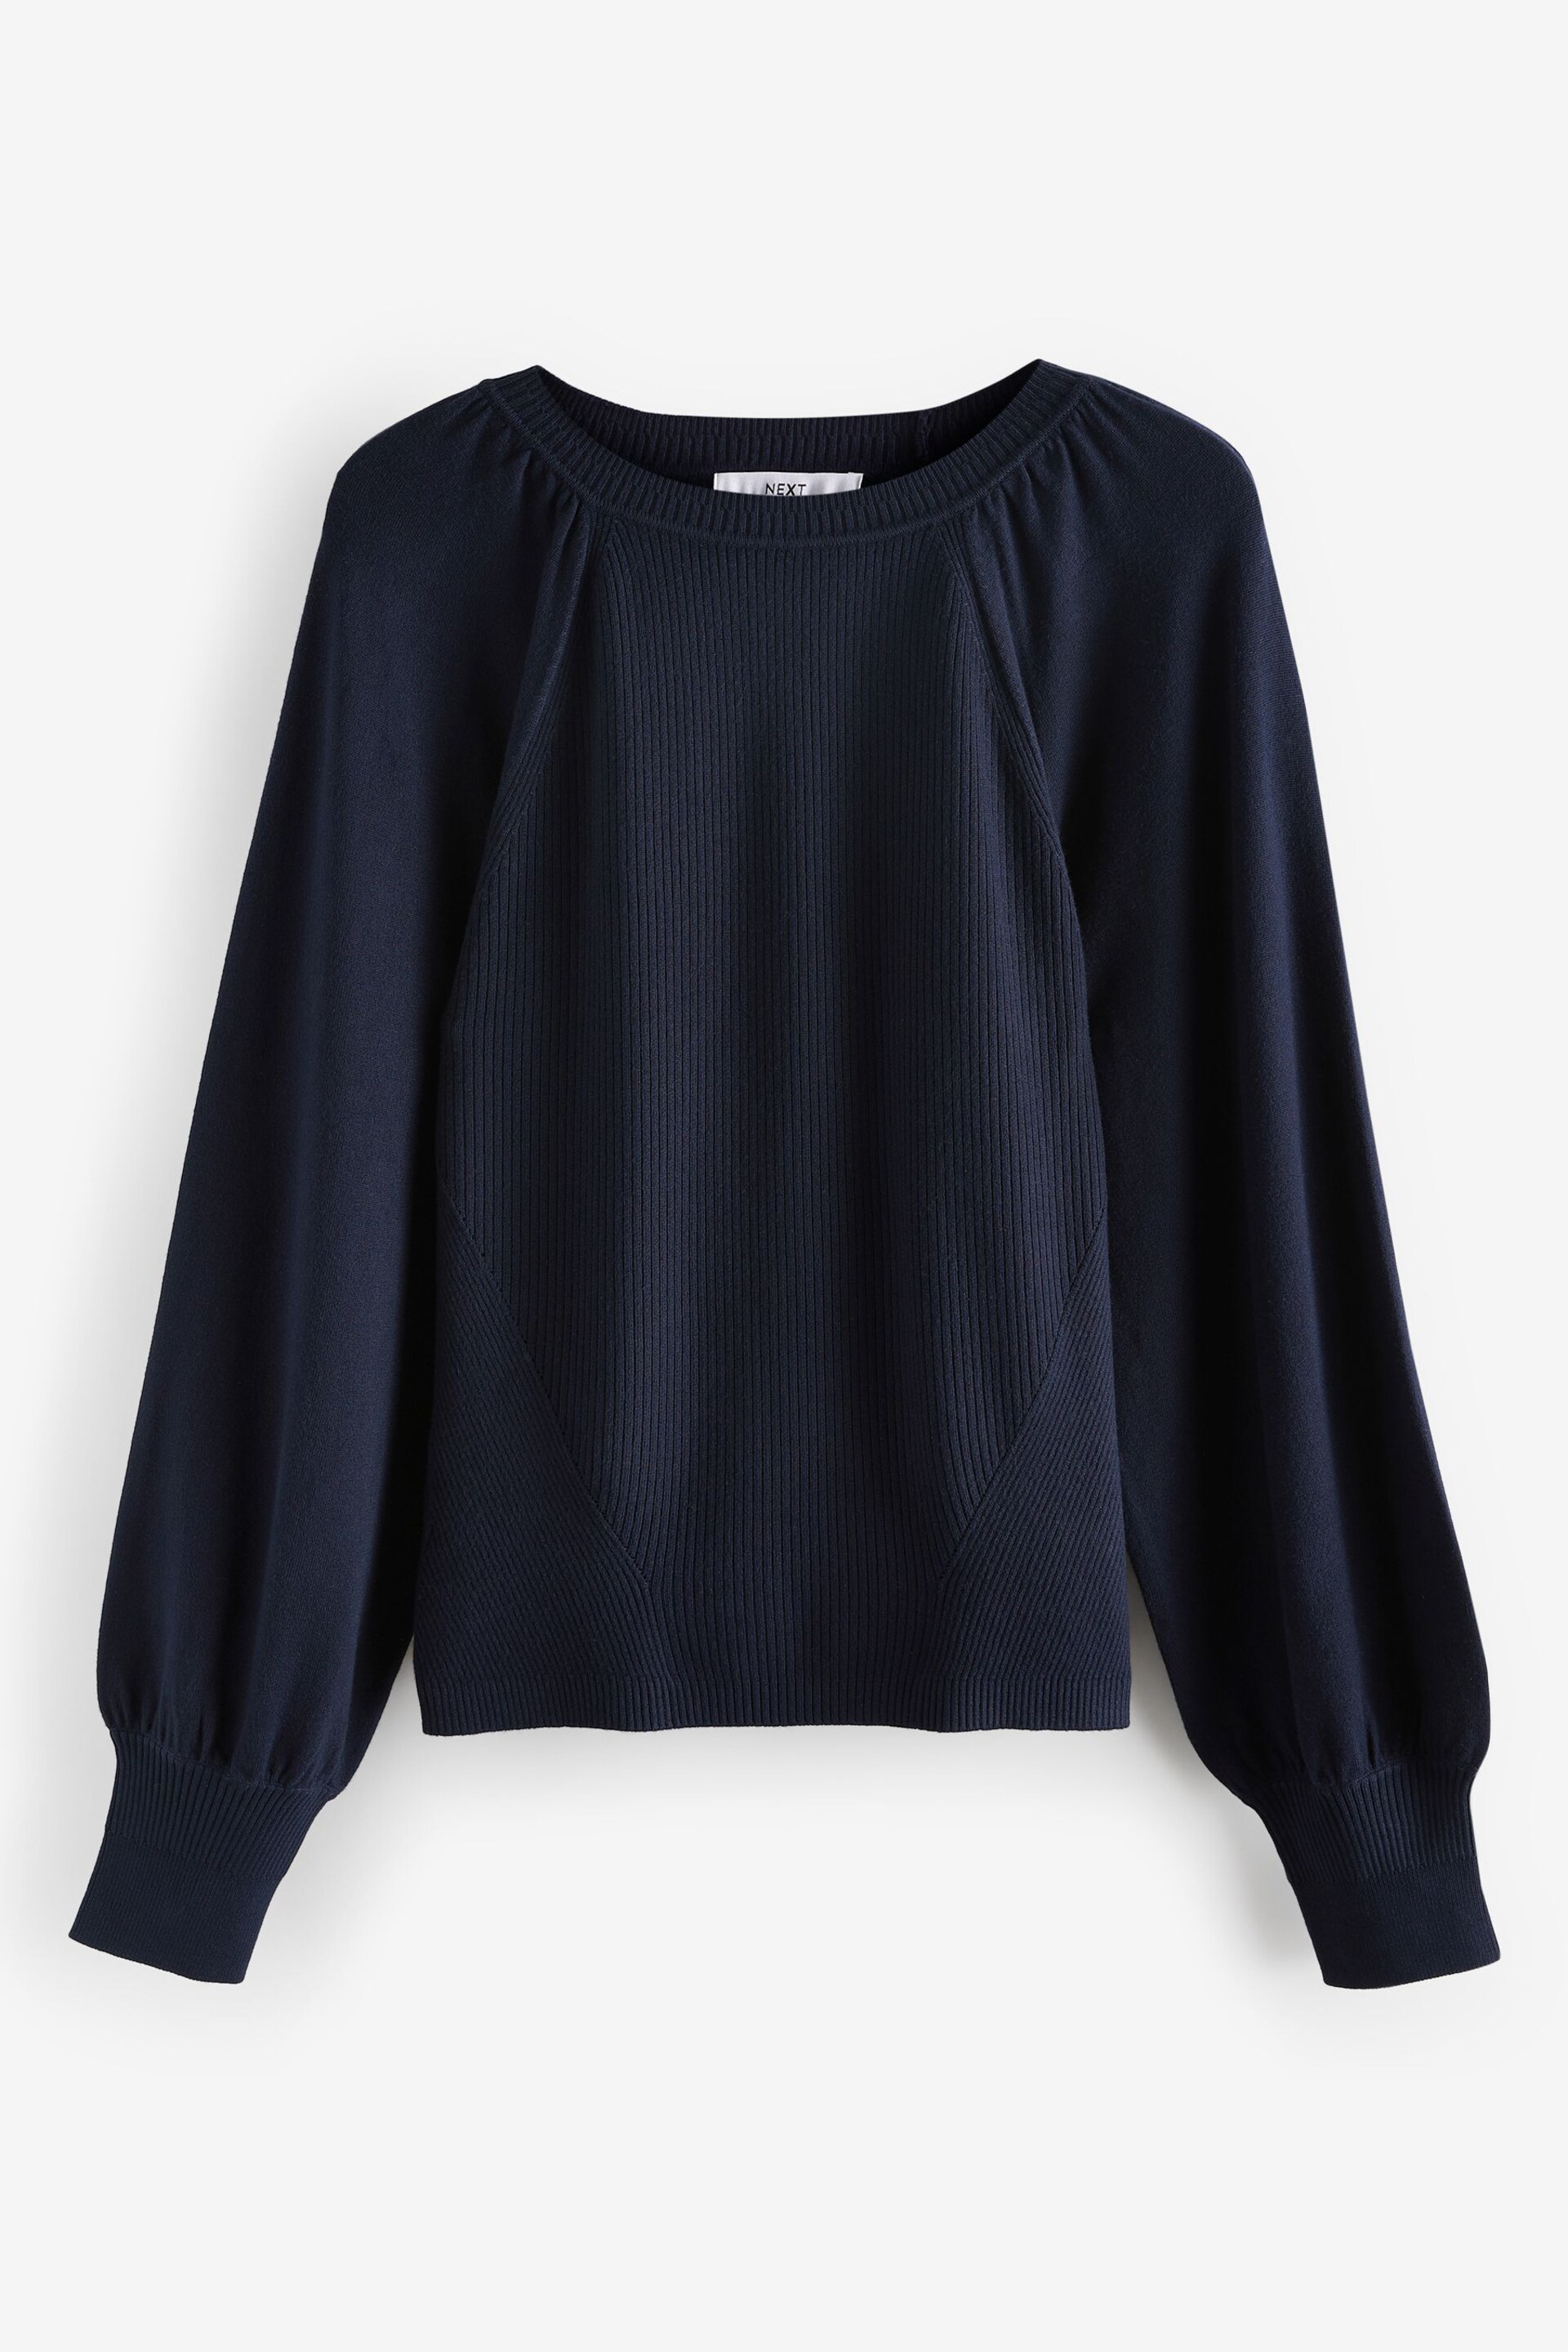 Navy Blue Puff Sleeve Jumper - Image 5 of 6